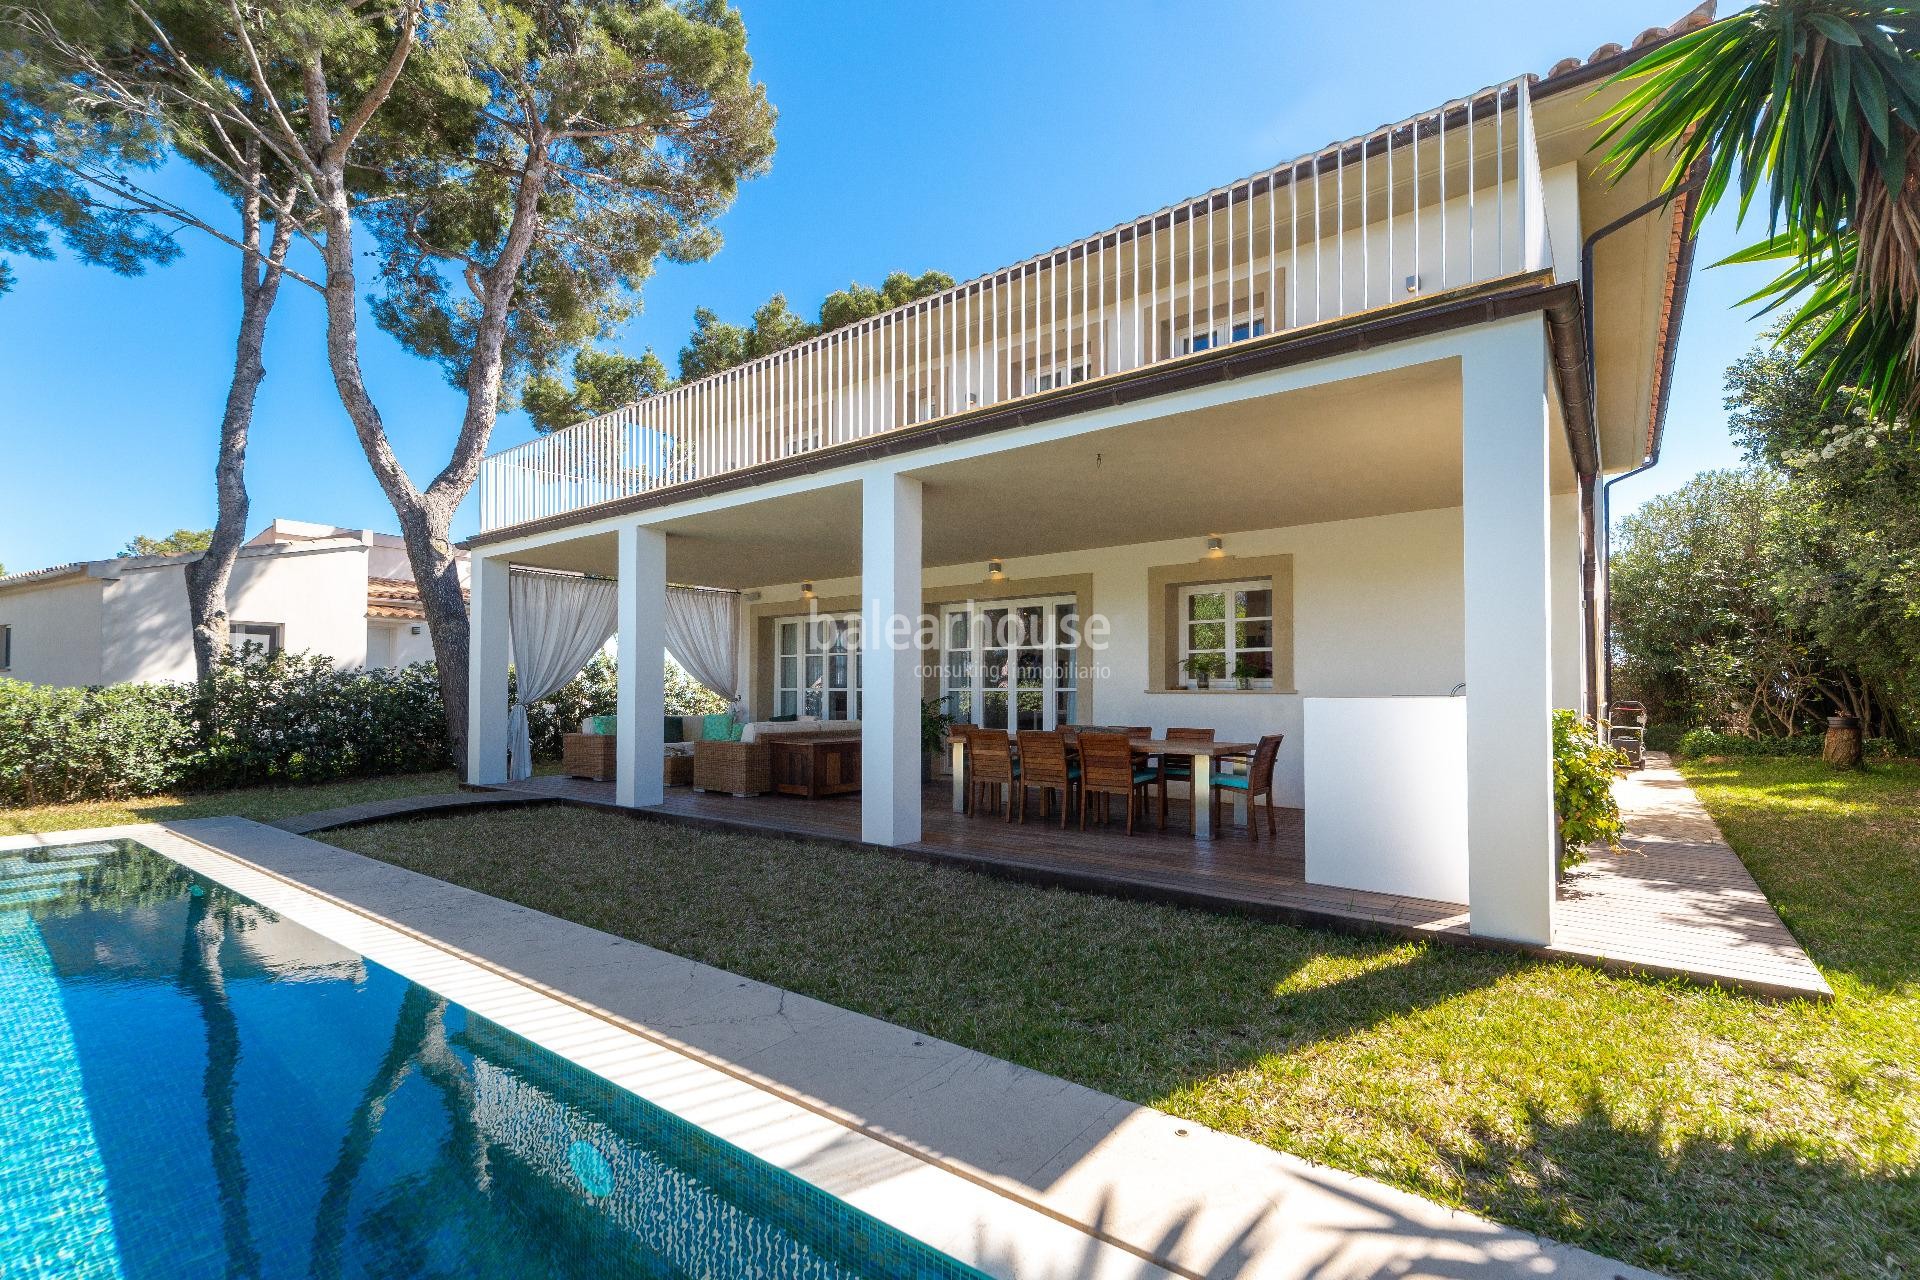 Mediterranean style villa with sea views perfect for families in Costa den Blanes